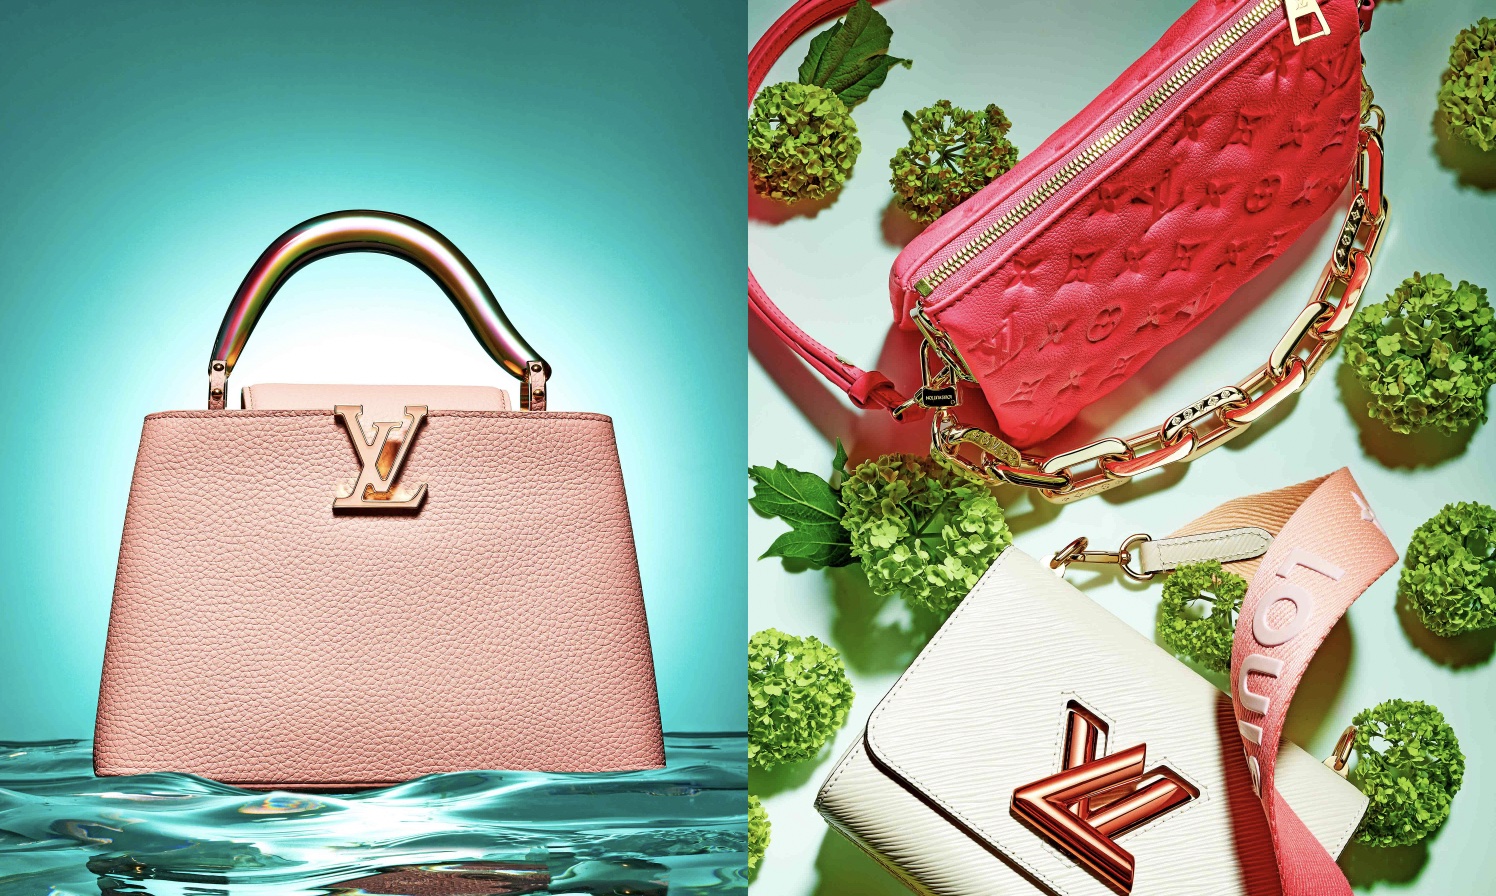 Fashion & Leather Goods - Ready-to-wear, haute couture, accessories – LVMH